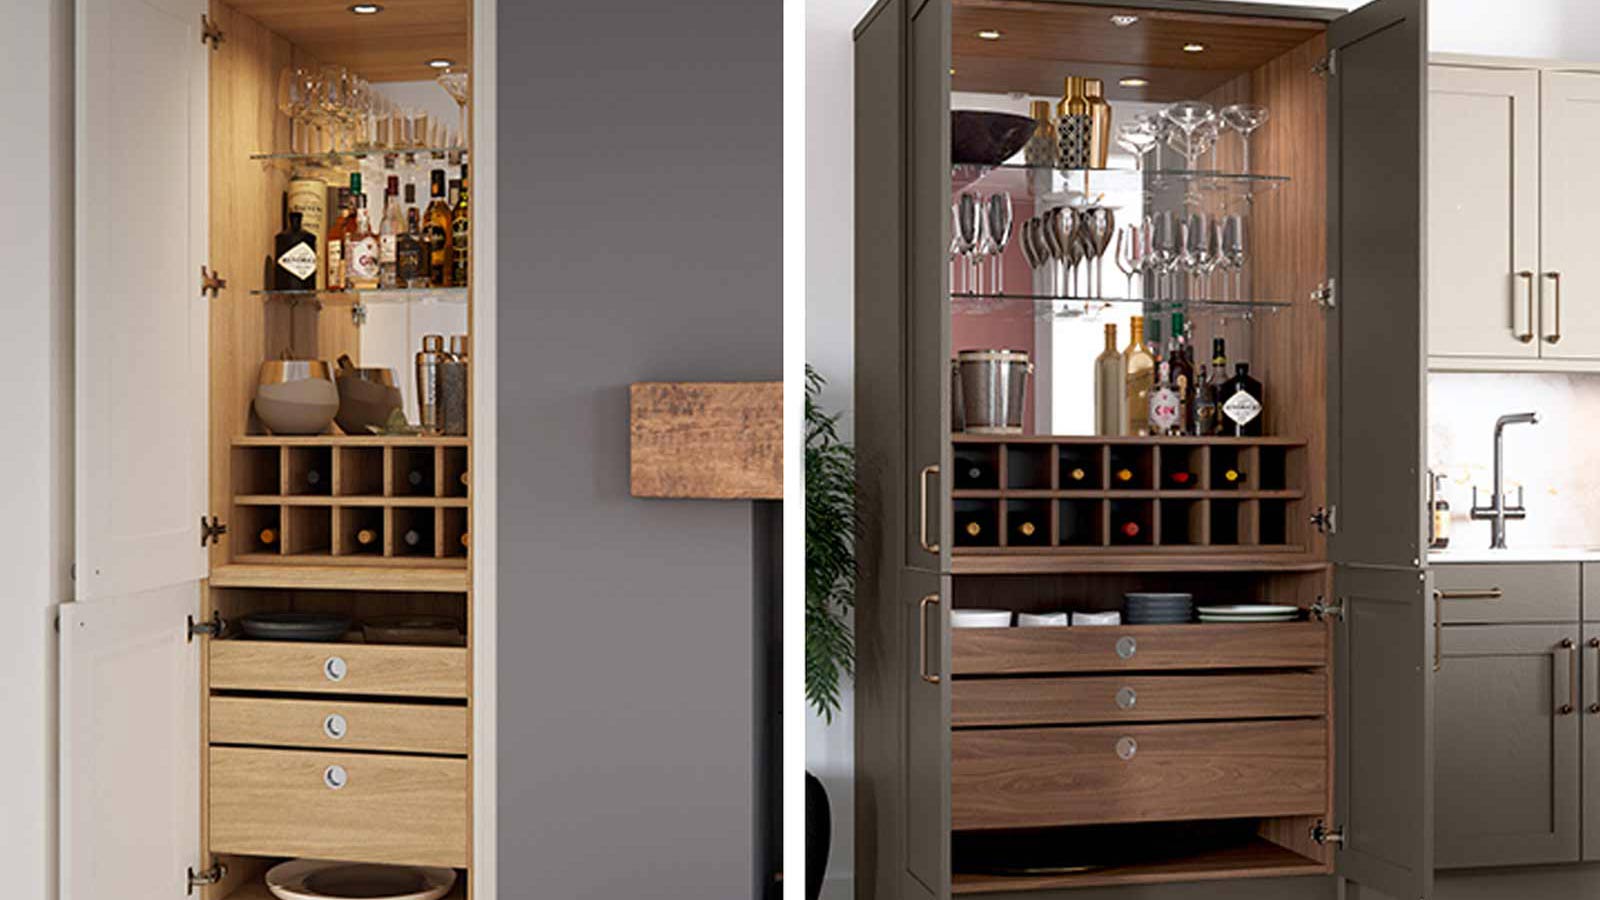 Wine storage cabinets with wine glass shelves for drink storage